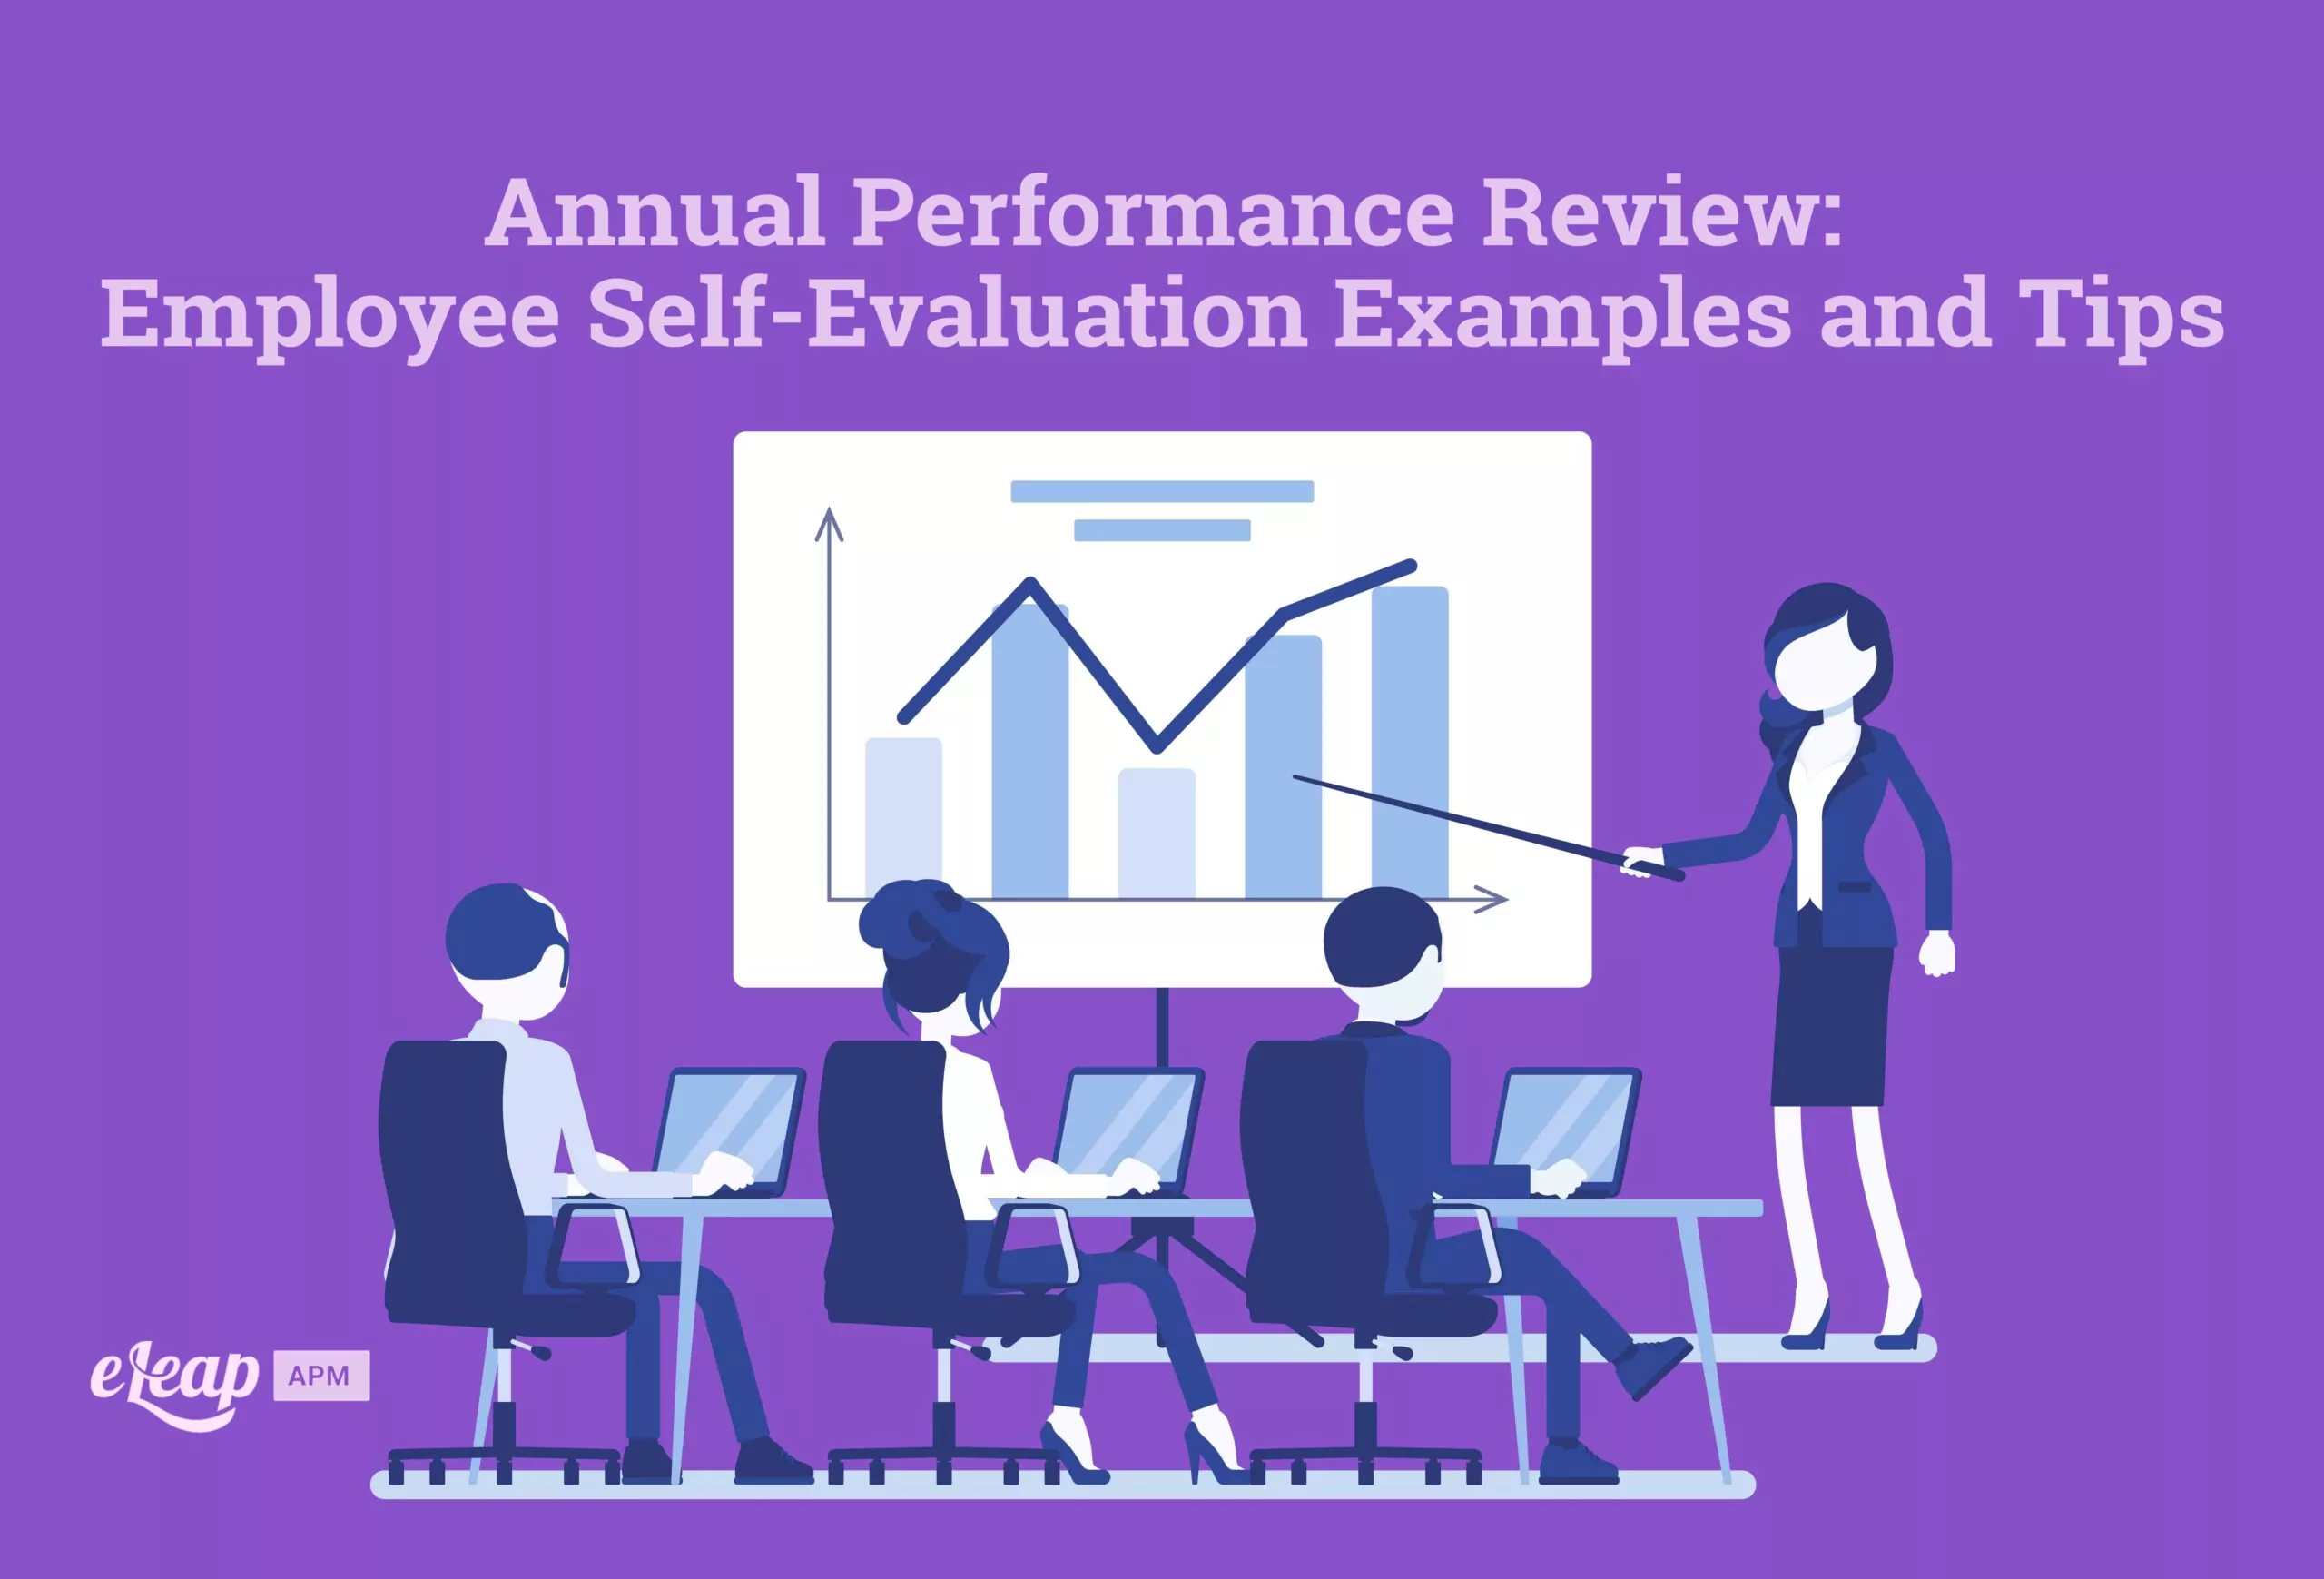 Annual Performance Review: Employee Self-Evaluation Examples and Tips 